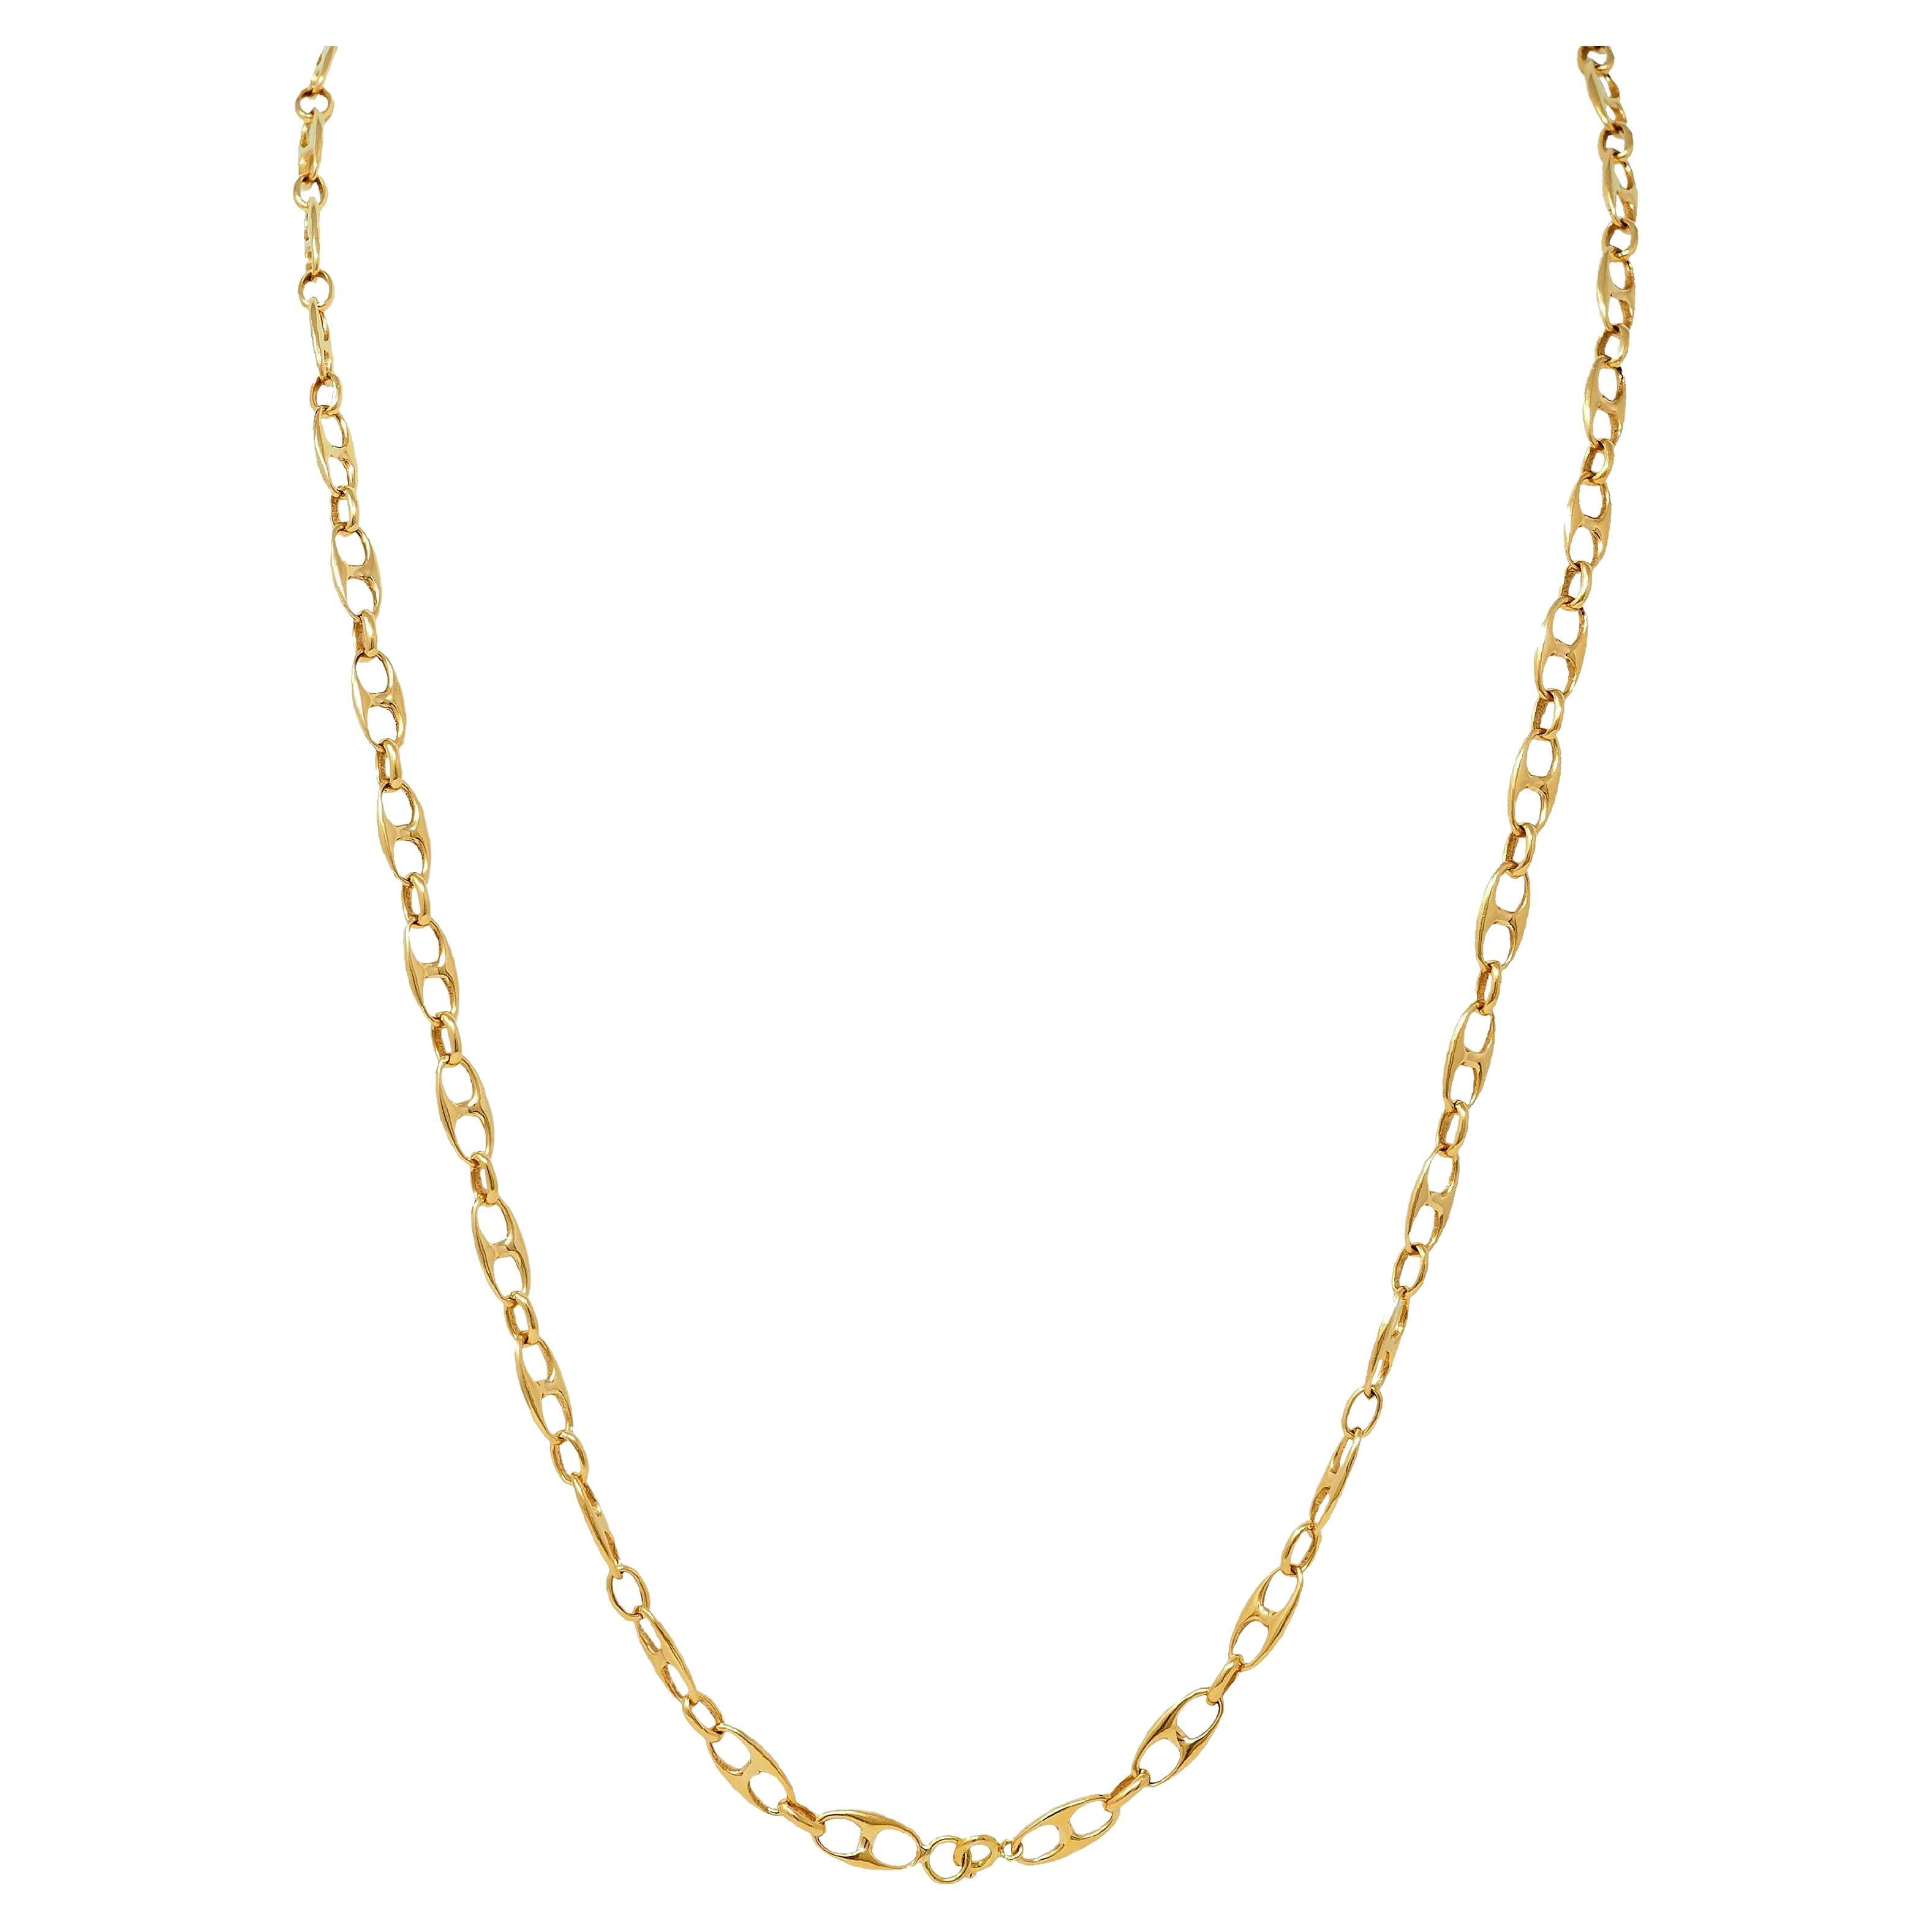 Vintage 18 Karat Yellow Gold Fancy Mariner Link Chain Necklace For Sale